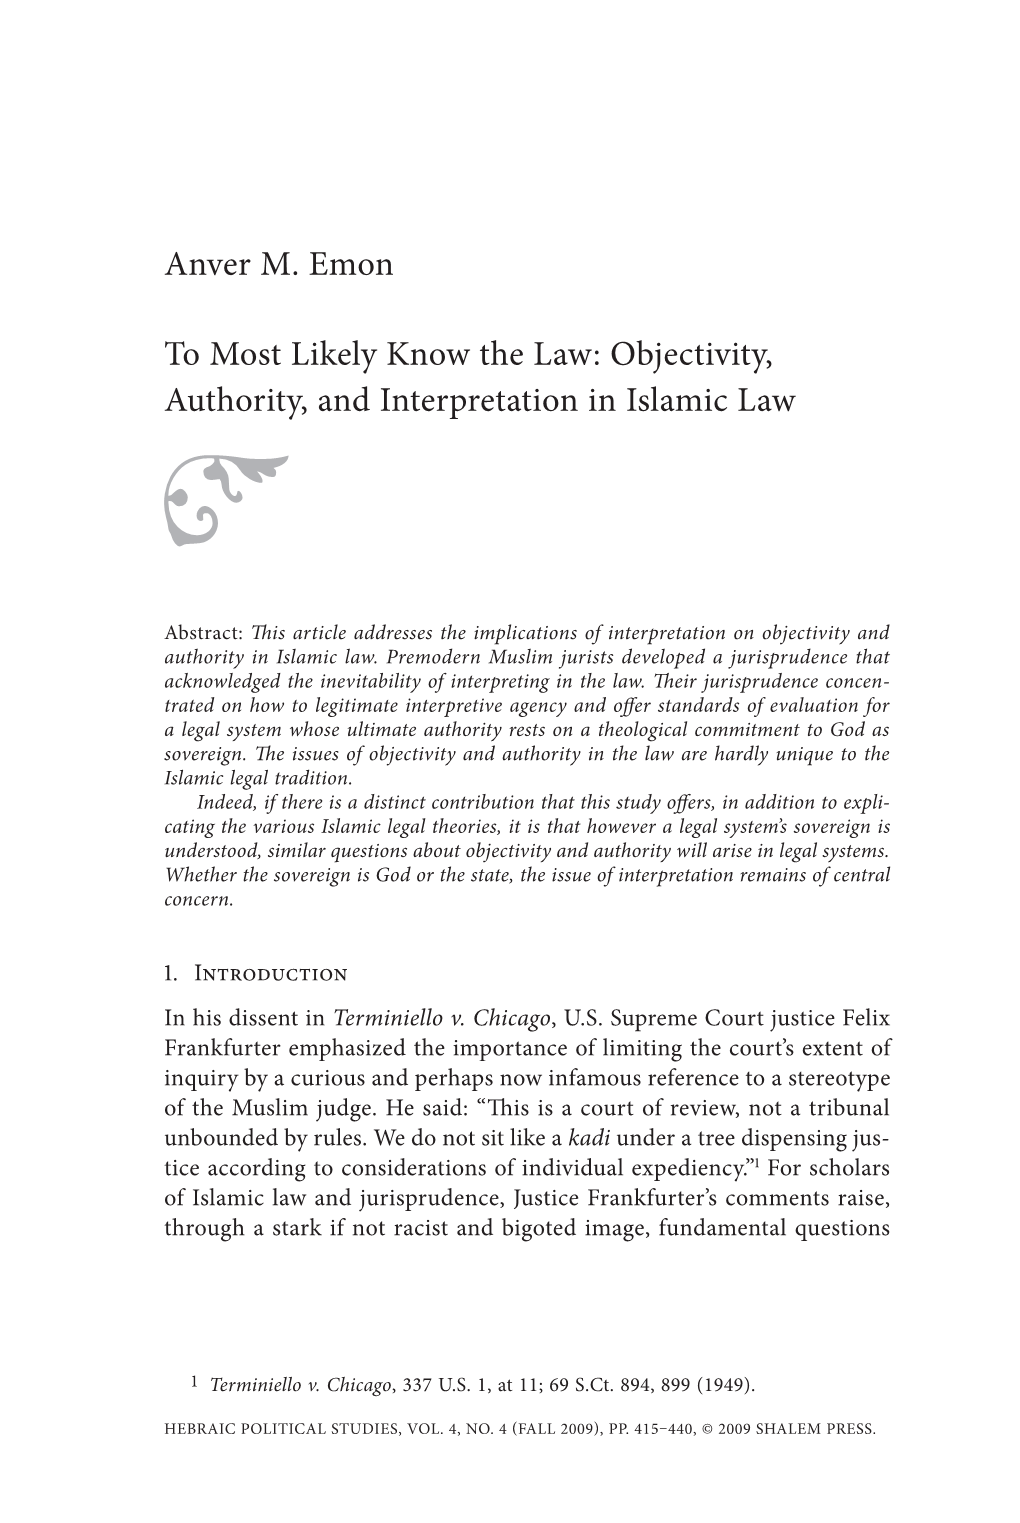 Anver M. Emon to Most Likely Know the Law: Objectivity, Authority, And